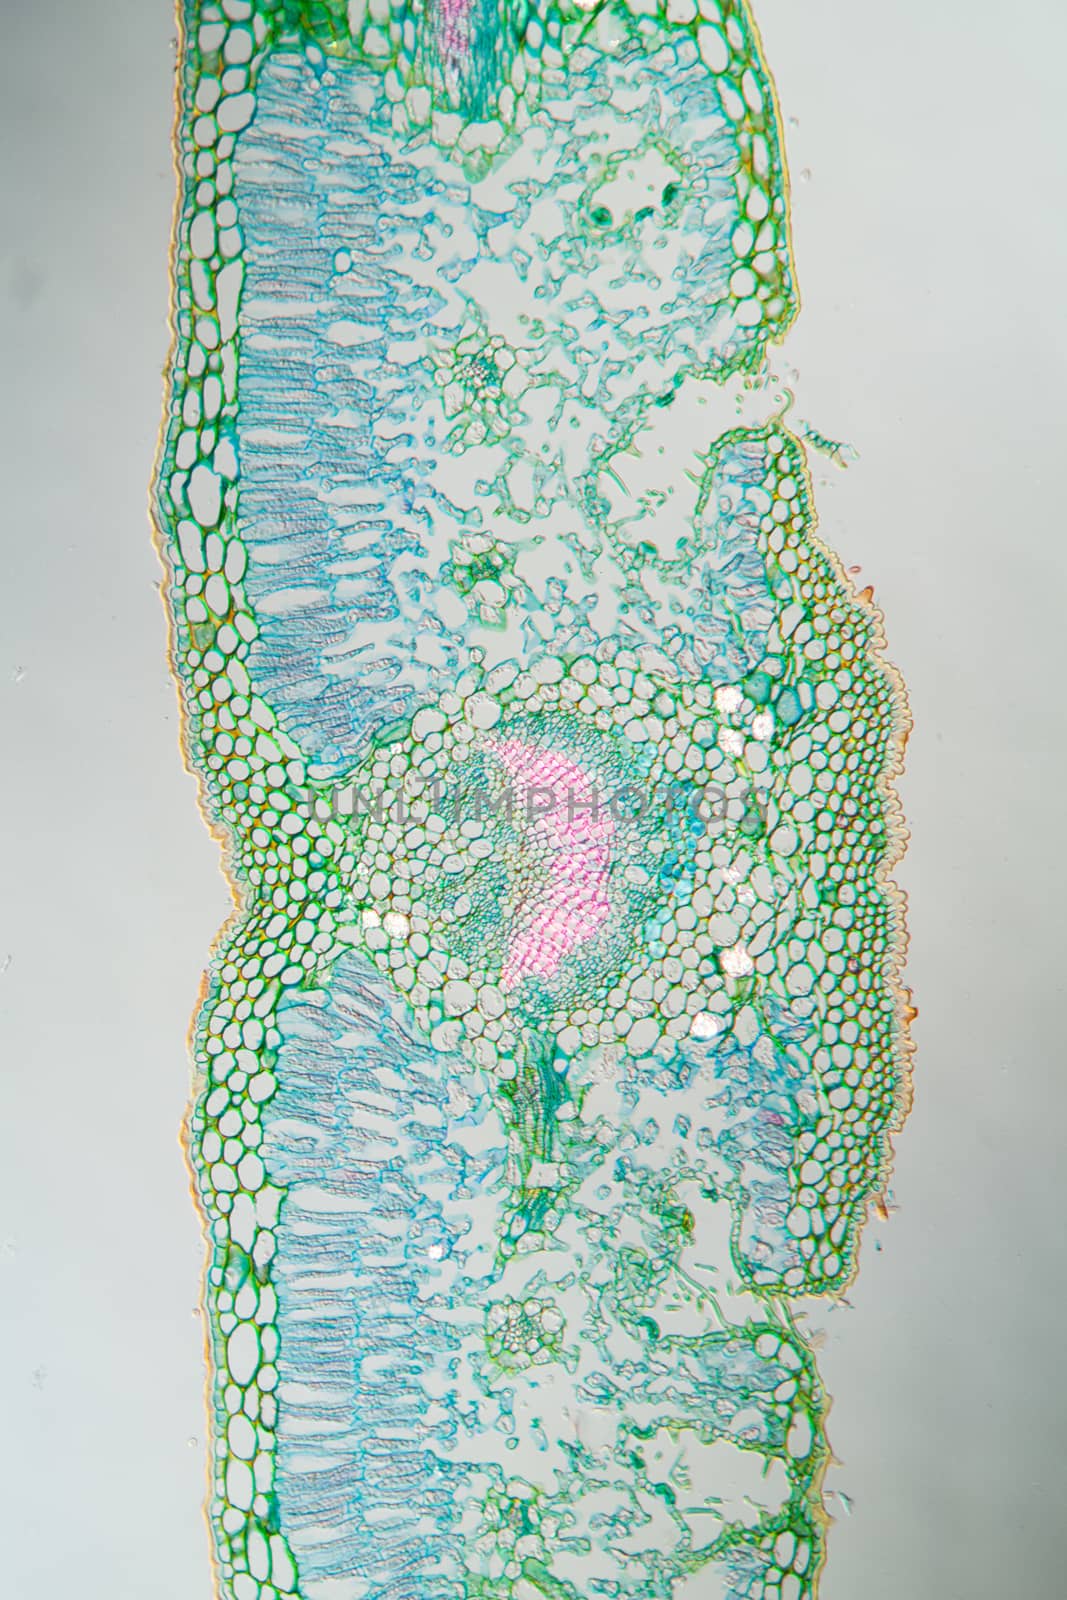 Weed leaf cross section under the microscope 100x by Dr-Lange